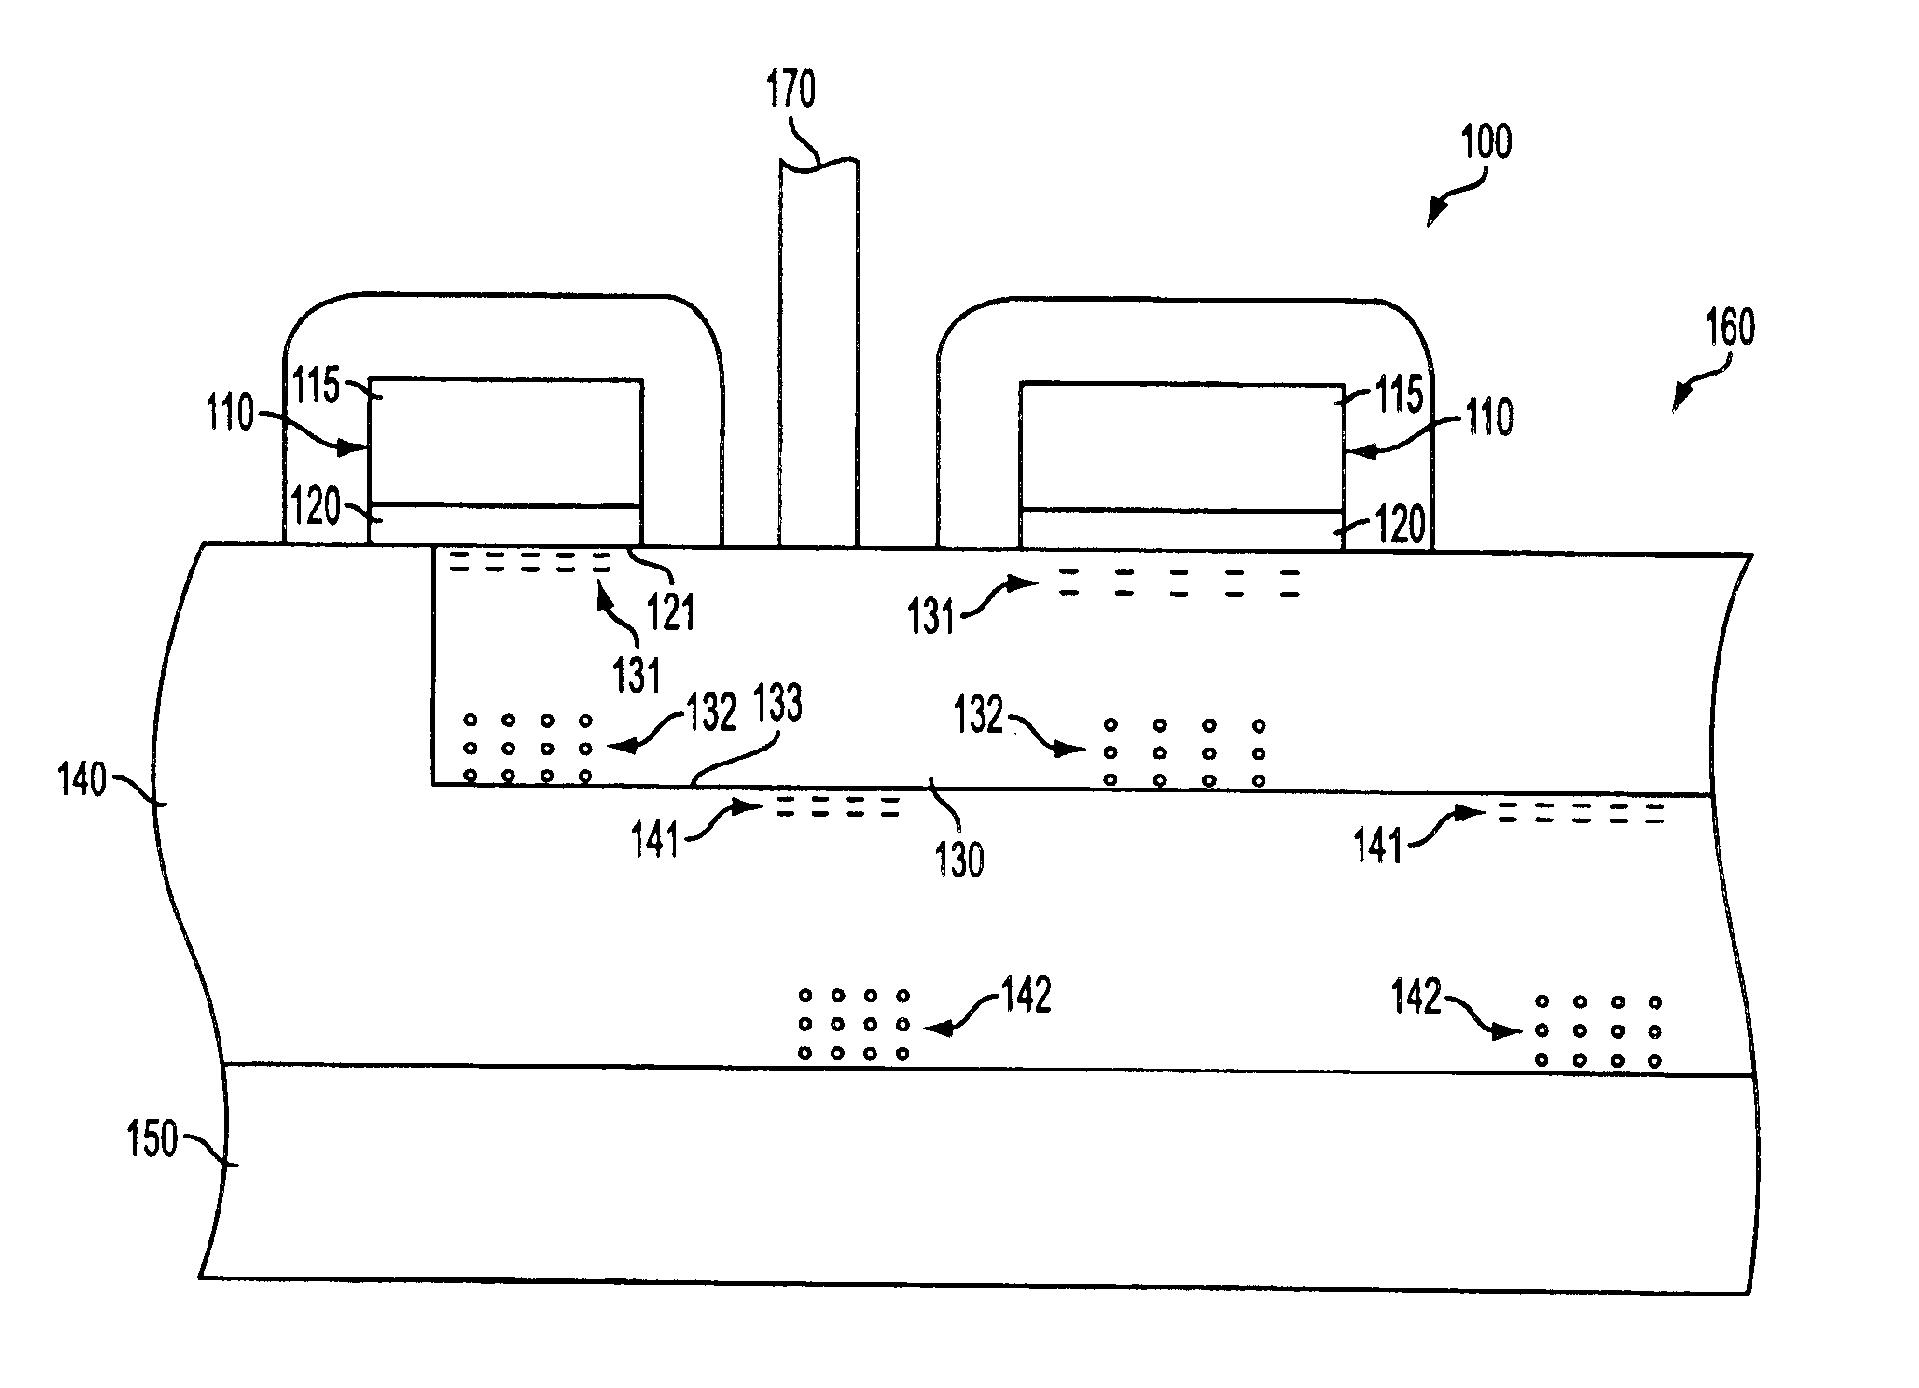 Field-shielded SOI-MOS structure free from floating body effect, and method of fabrication therefor